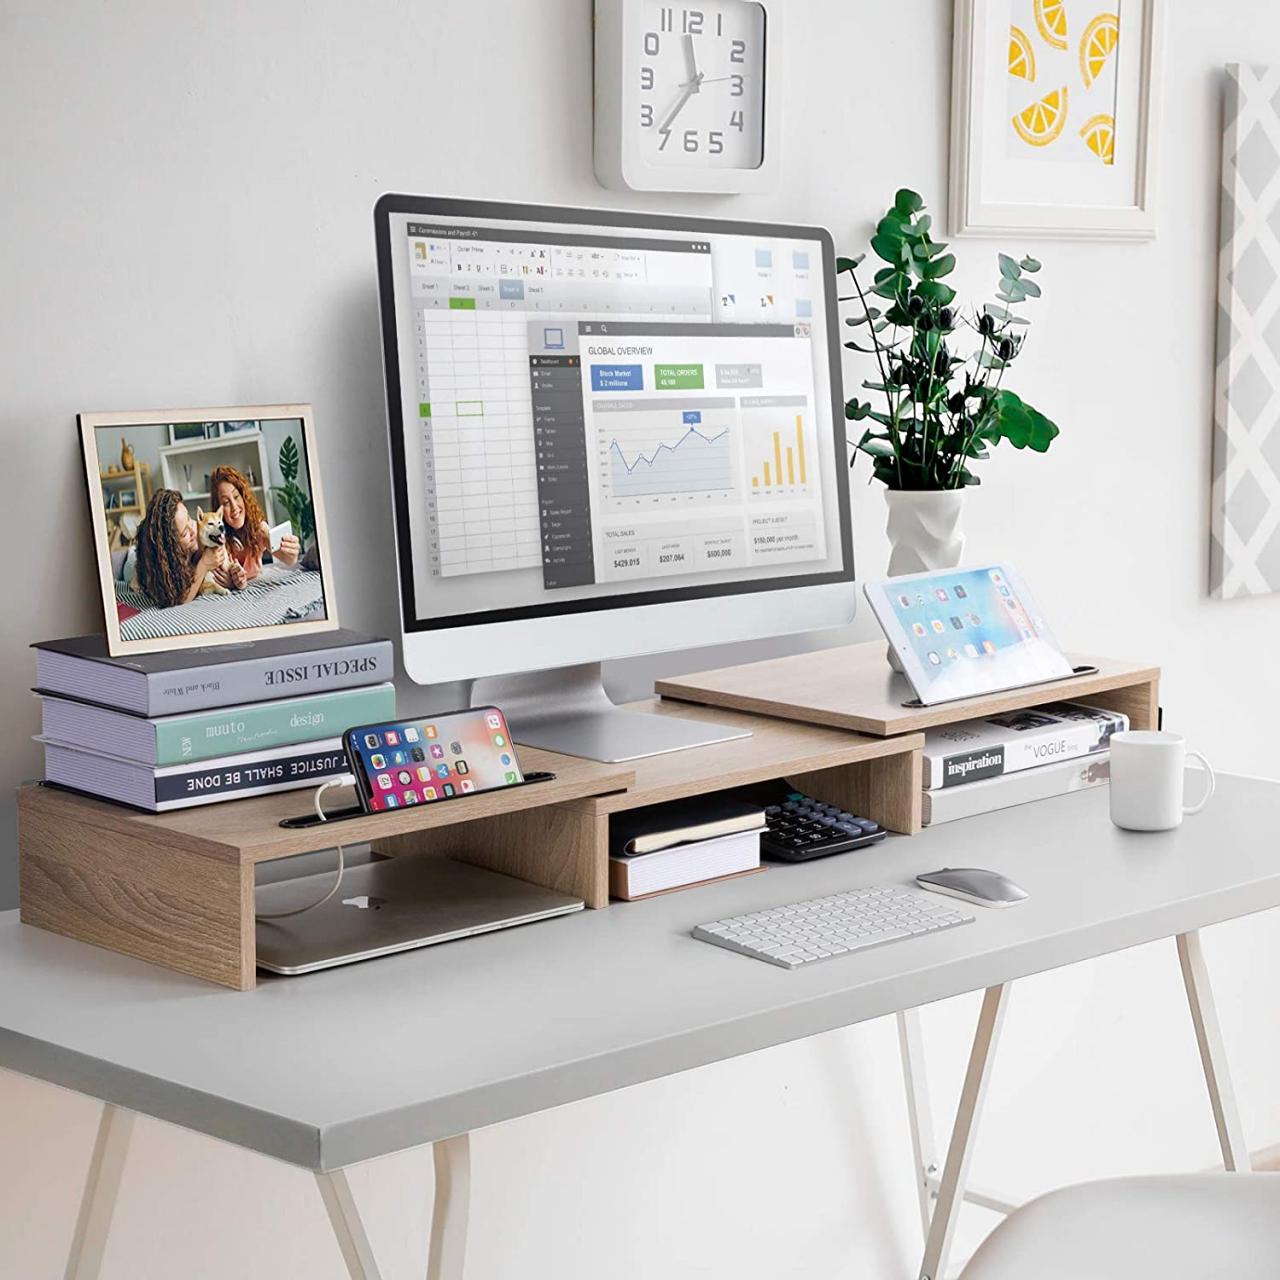 The Best Desk Accessories for Your Home Office or Workspace